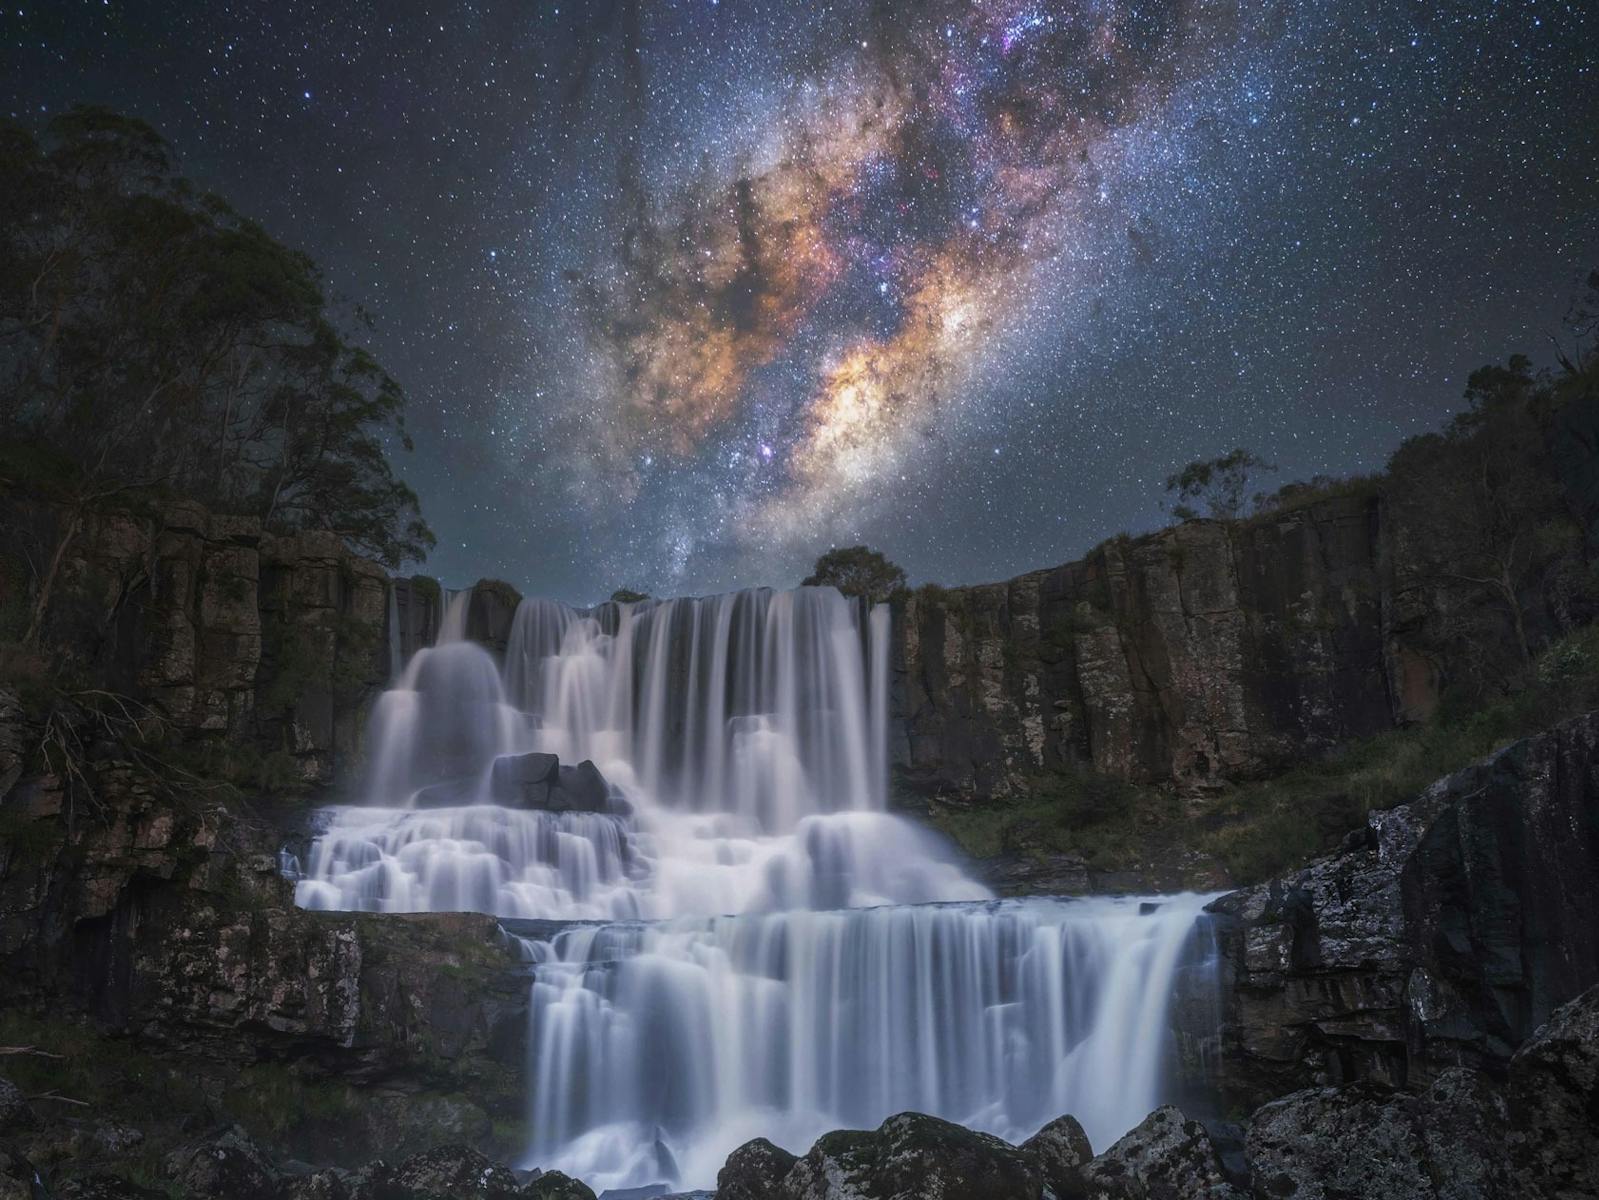 Learn how to photograph the Milky Way